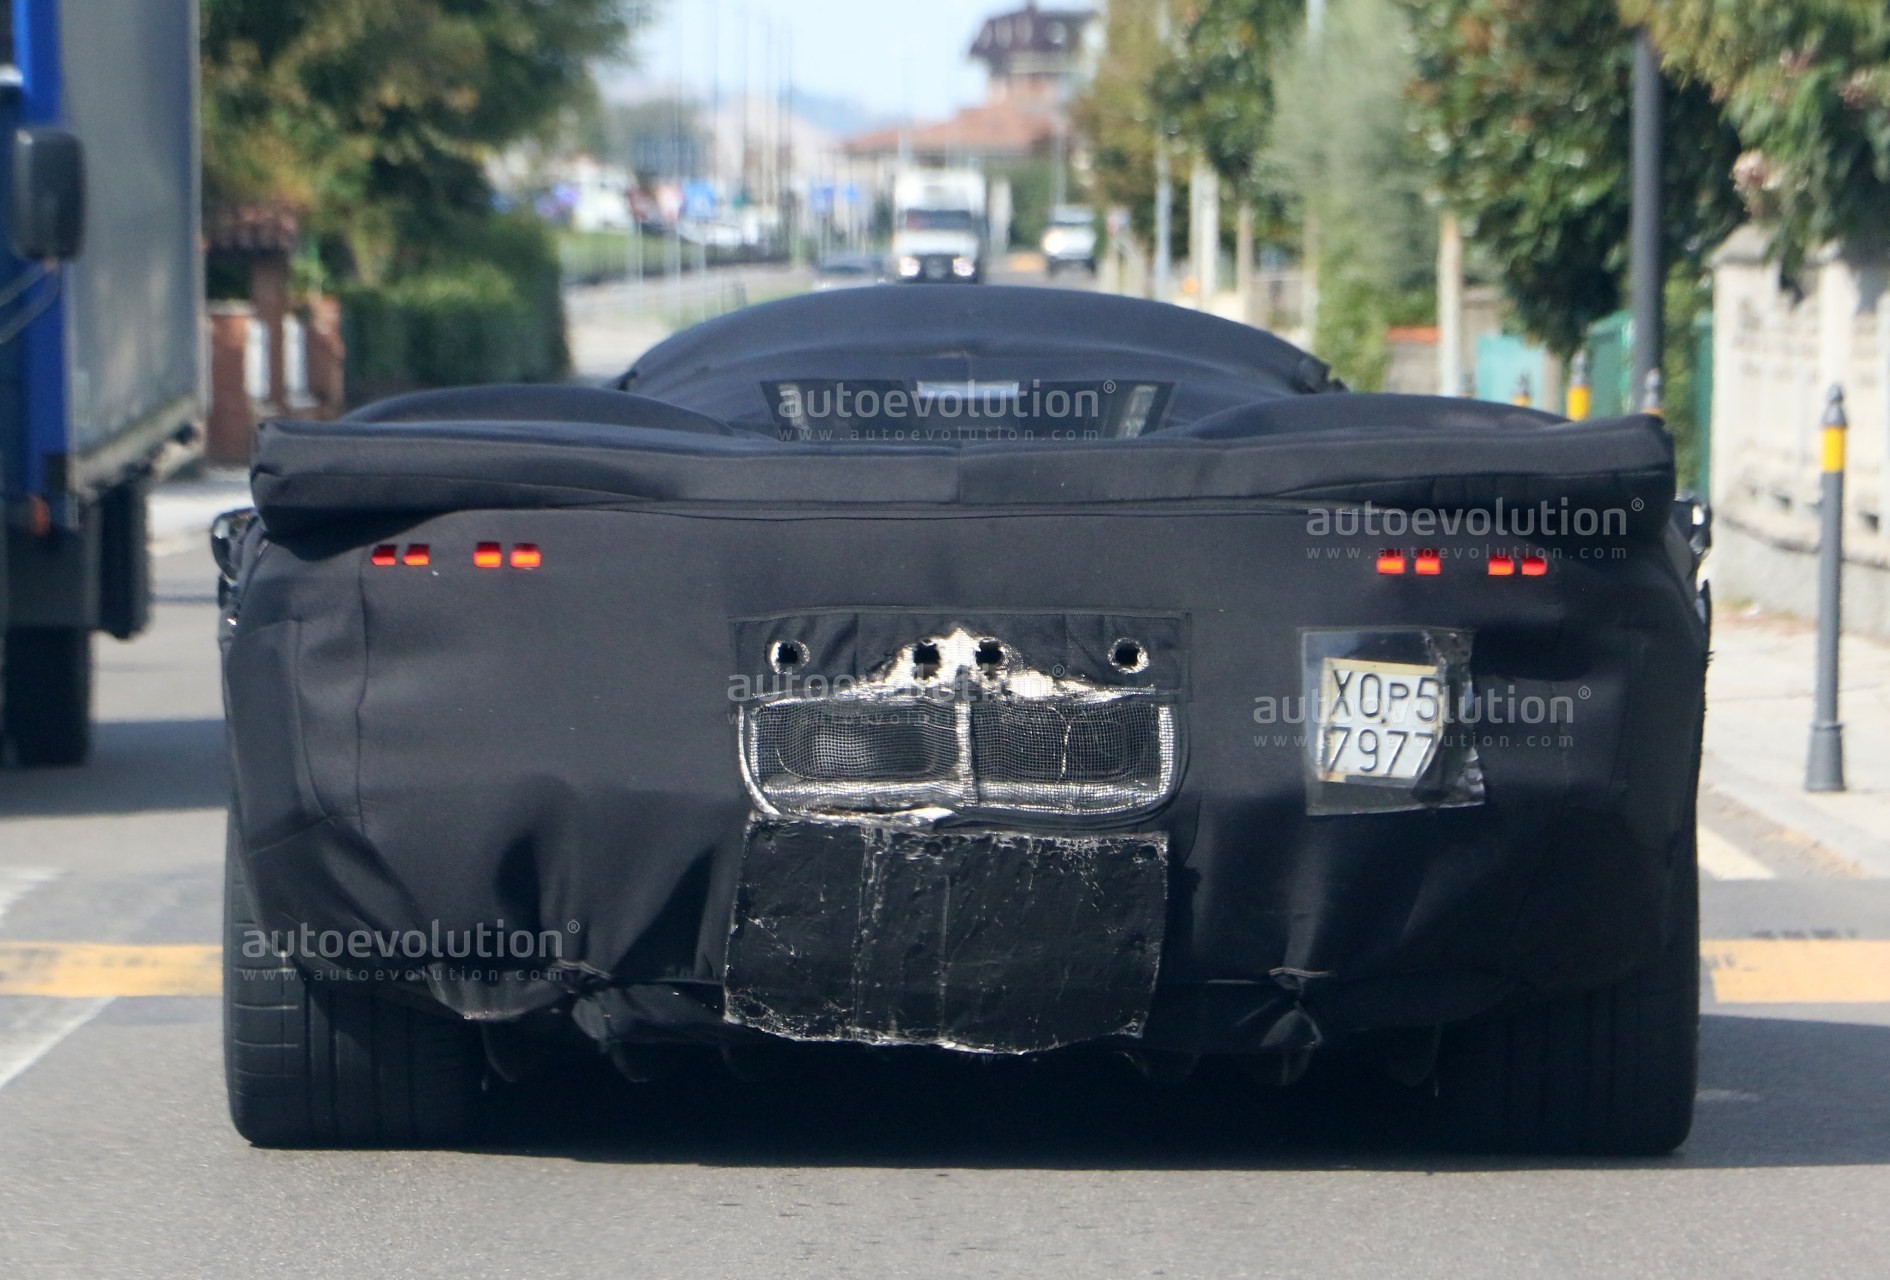 ferrari-icona-spotted-for-with-production-body-could-be-revealed-in-november_2.jpg